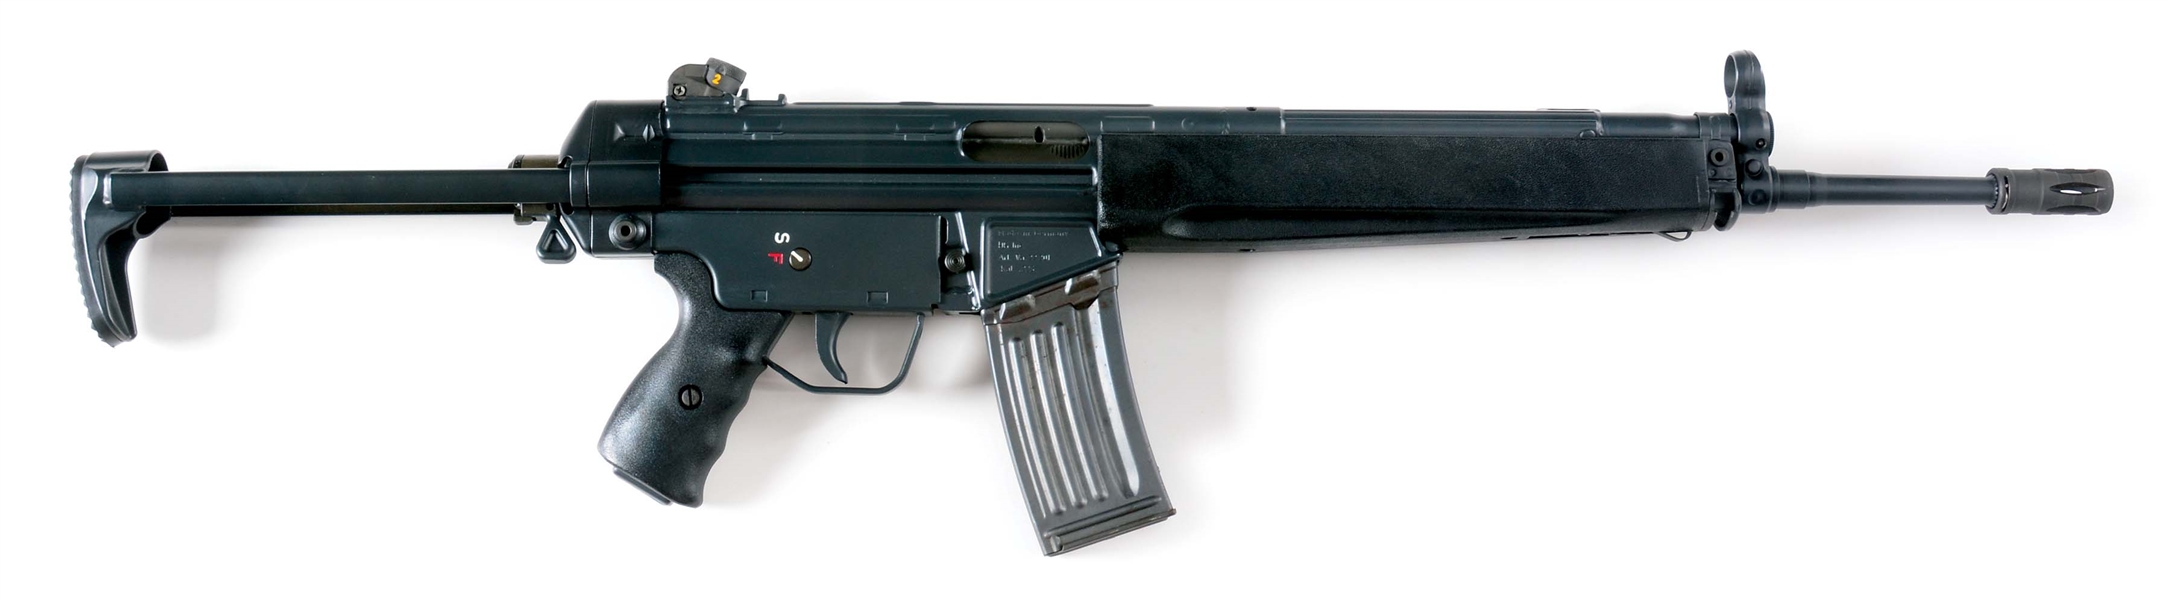 (M) PRE-BAN HECKLER & KOCH HK93 .223 WITH FACTORY COLLAPSIBLE STOCK (1980).